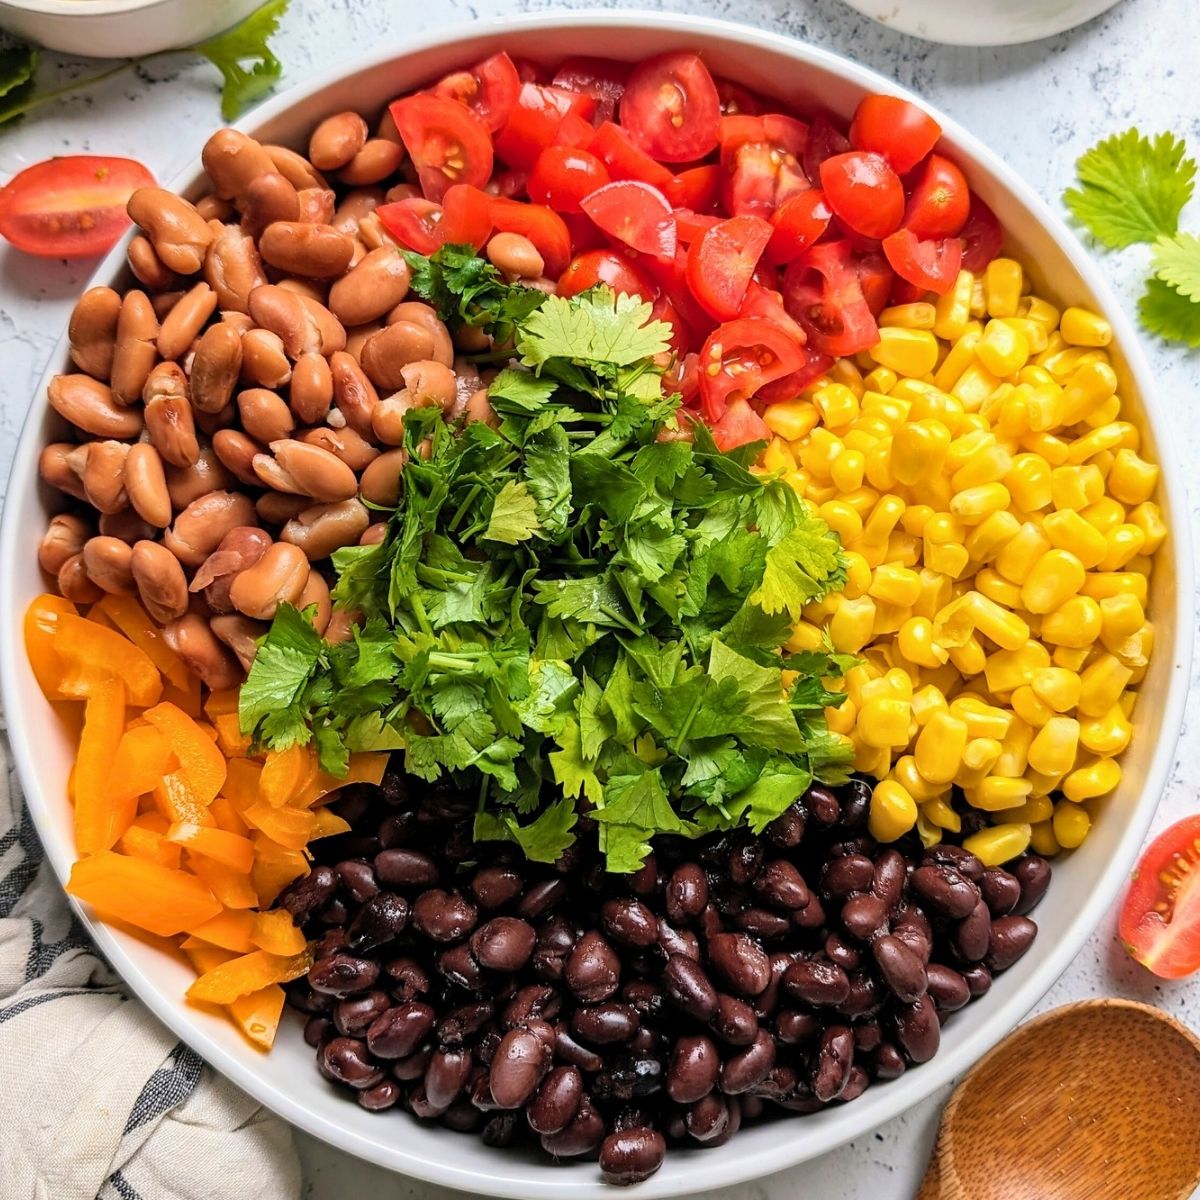 low sodium dips with beans, corn, tomatoes, peppers, and fresh herbs in a bowl divided by color